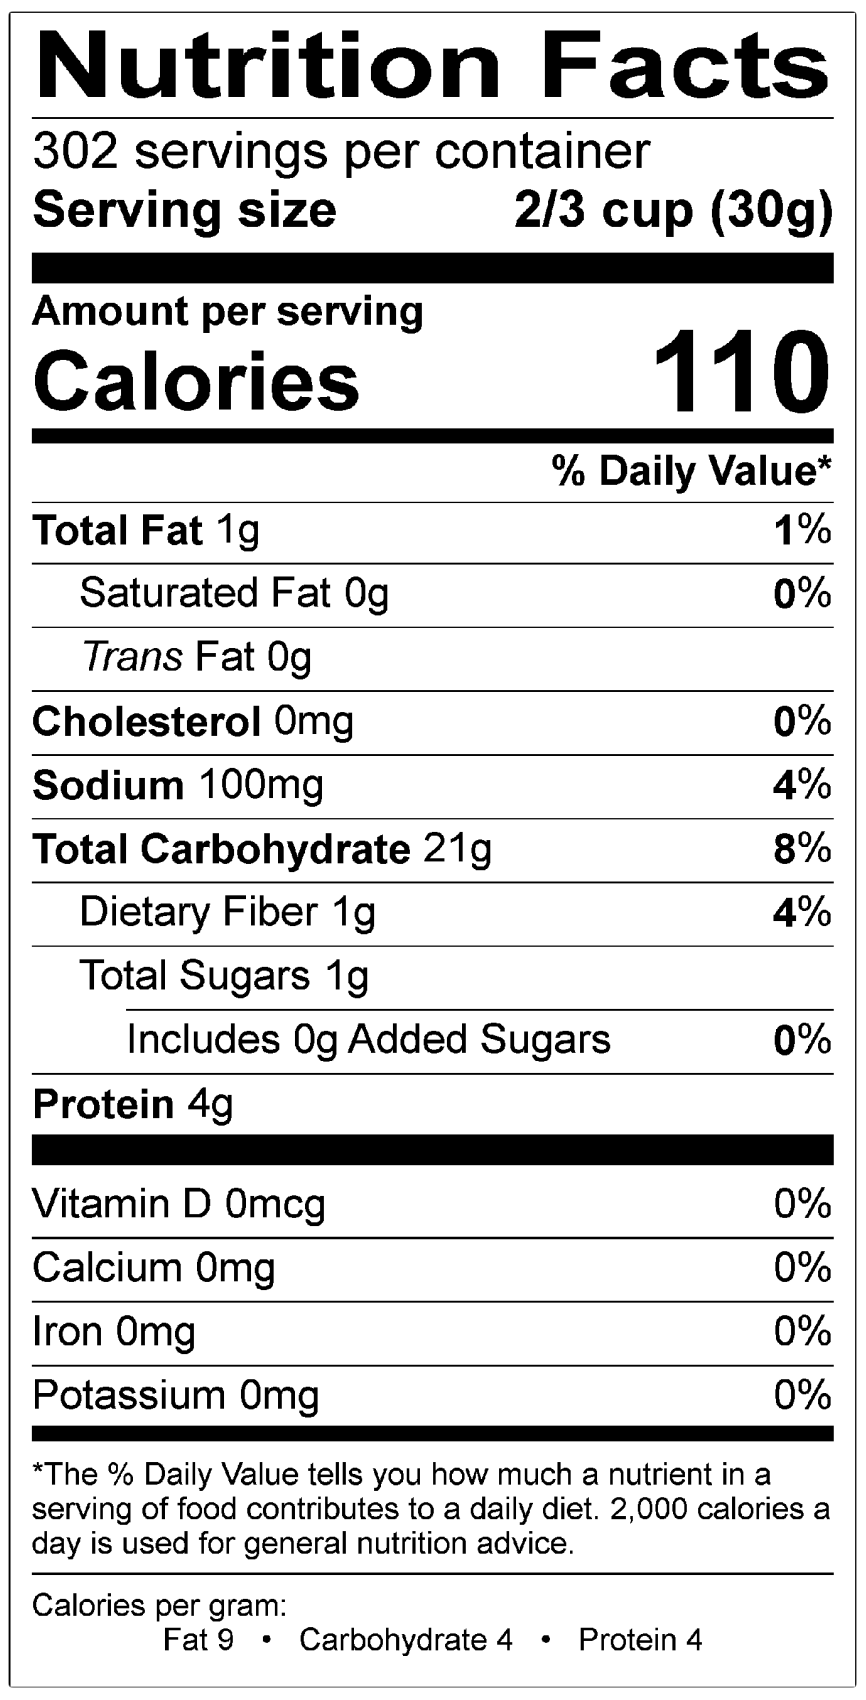 001020 Authentic Panko Nutrition Facts